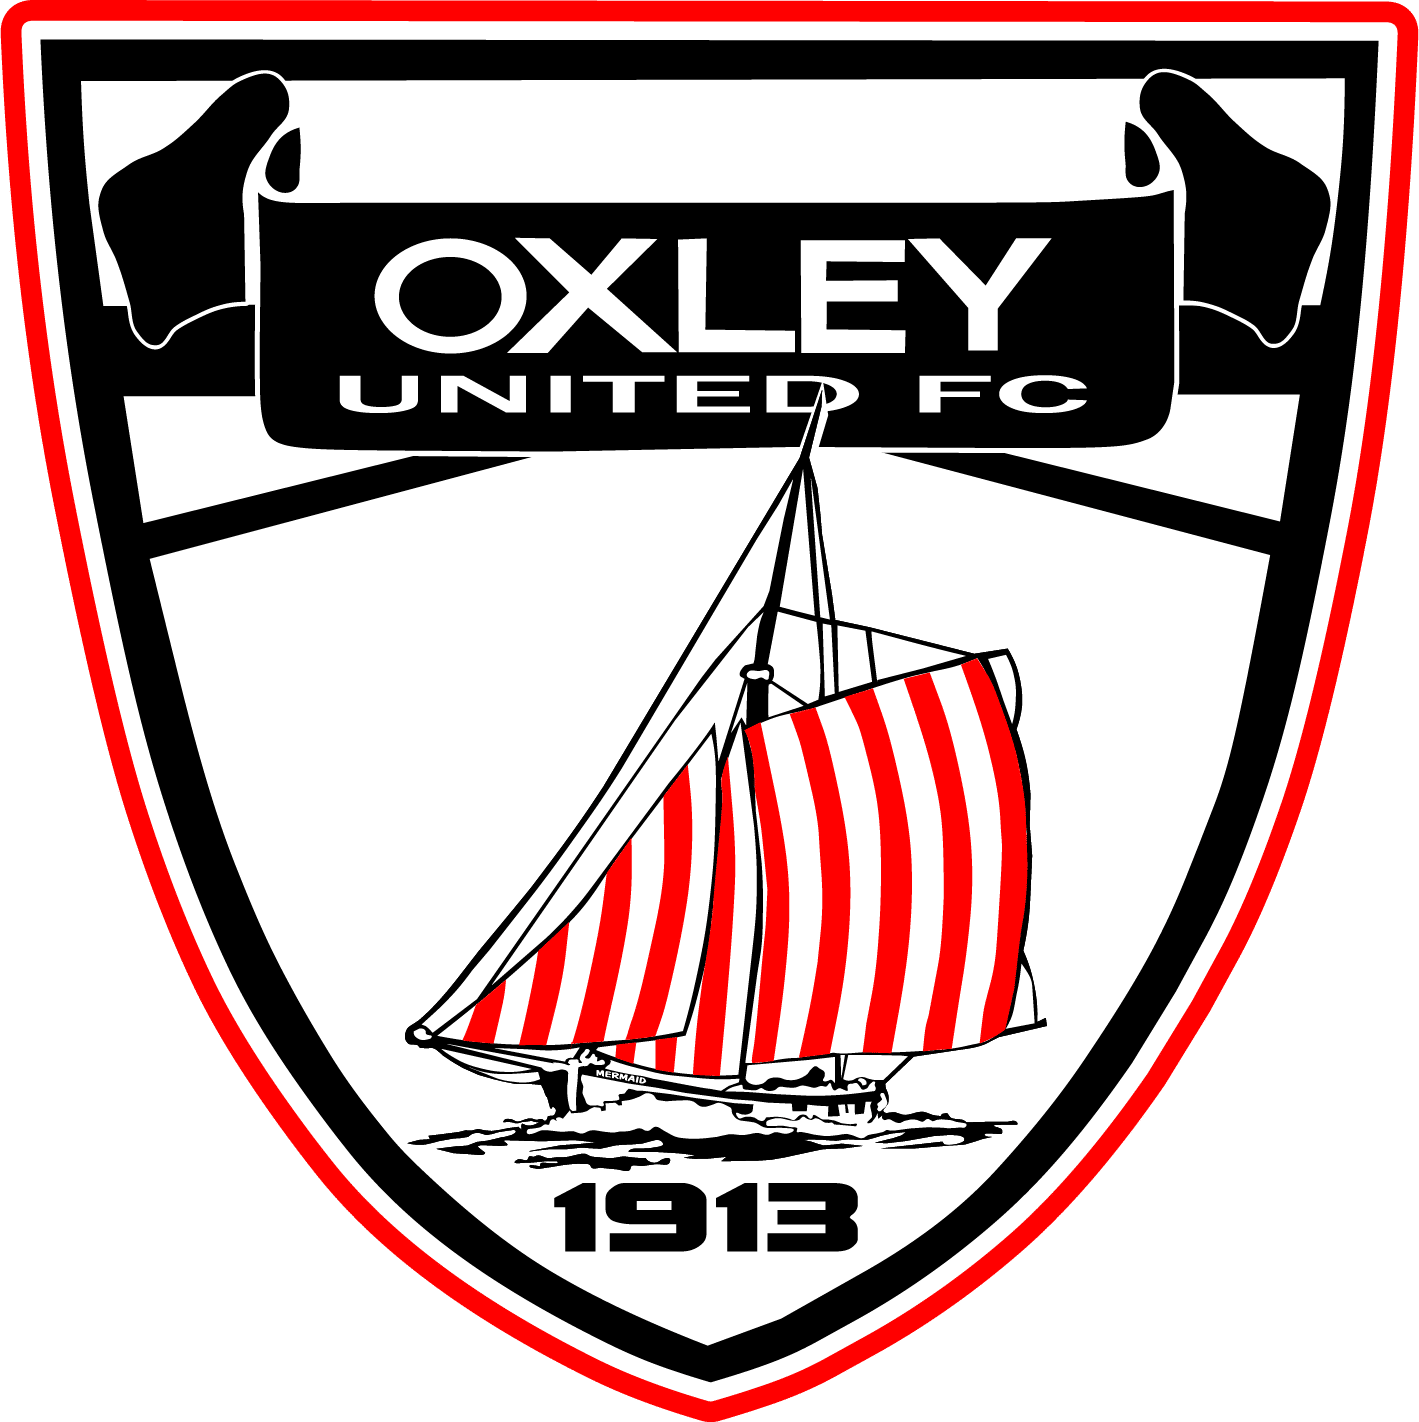 OXLEY UNITED